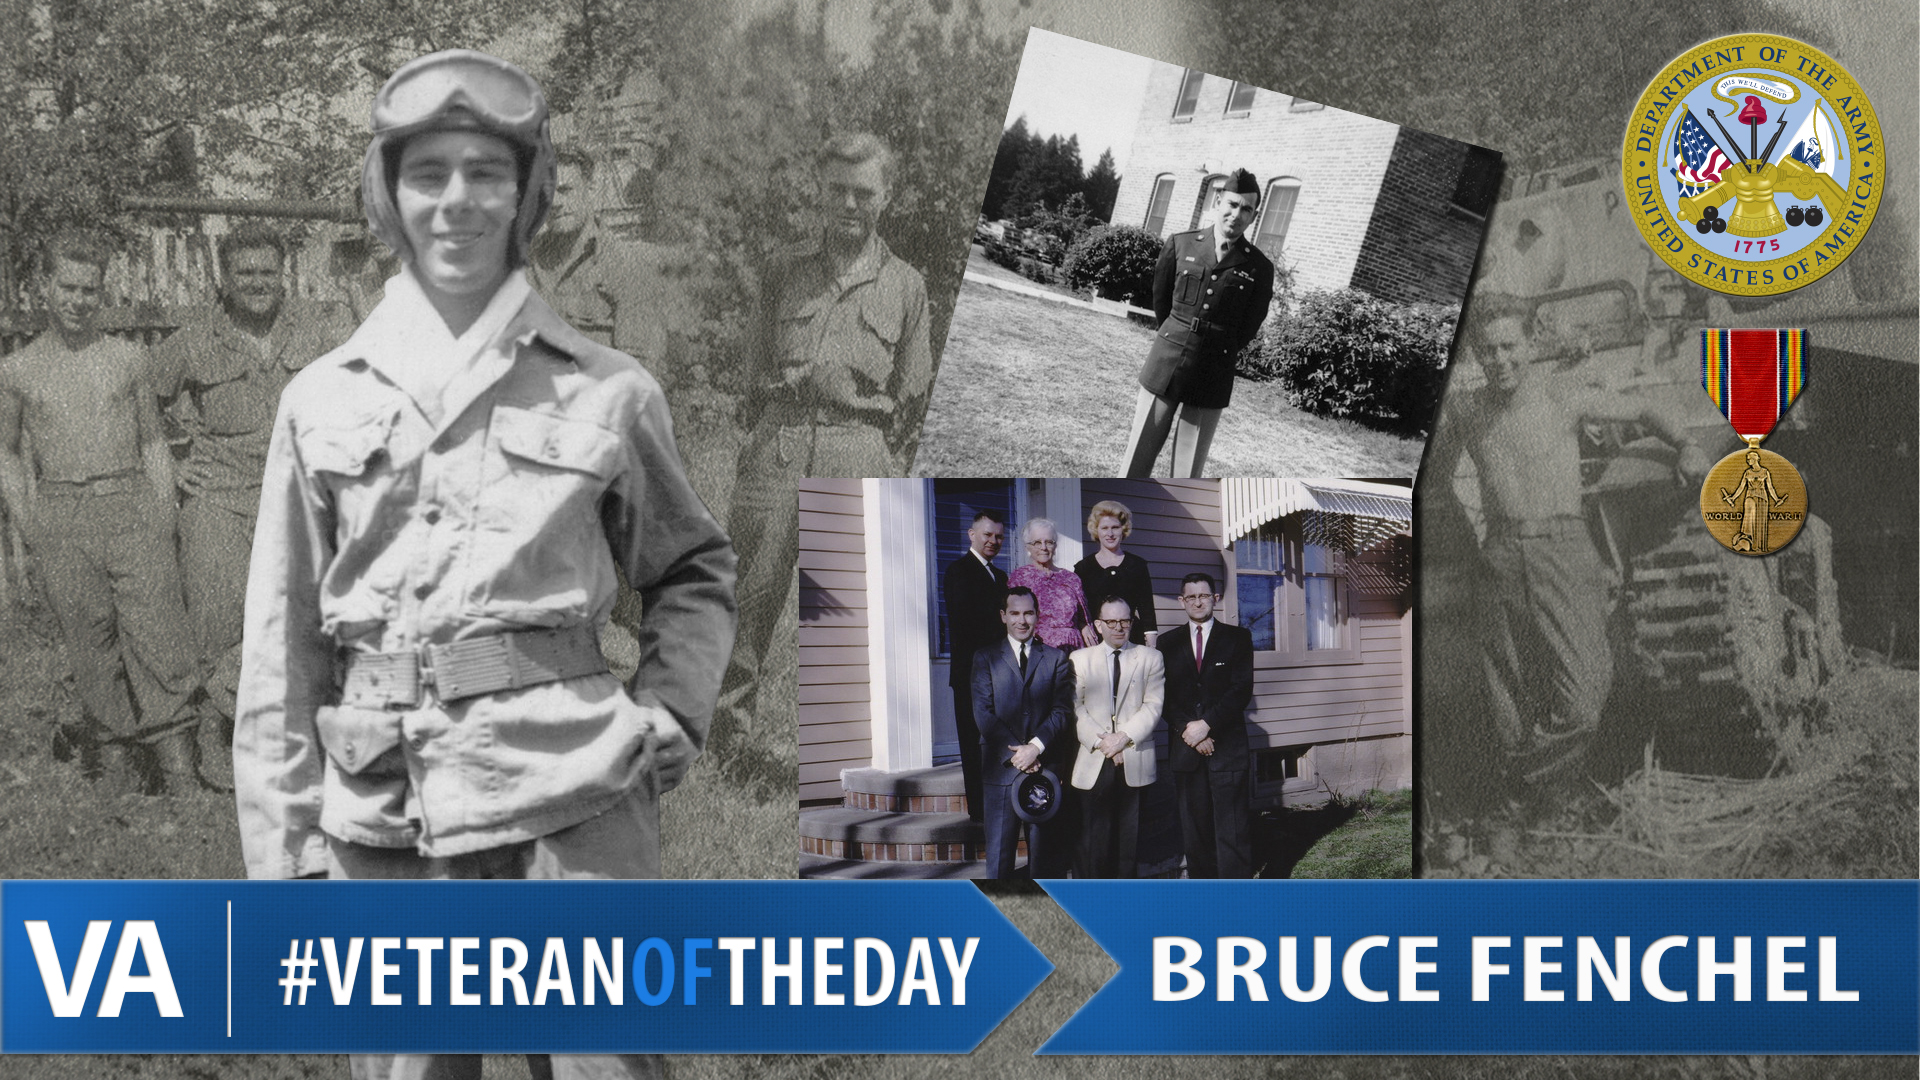 Bruce Fenchel - Veteran of the Day